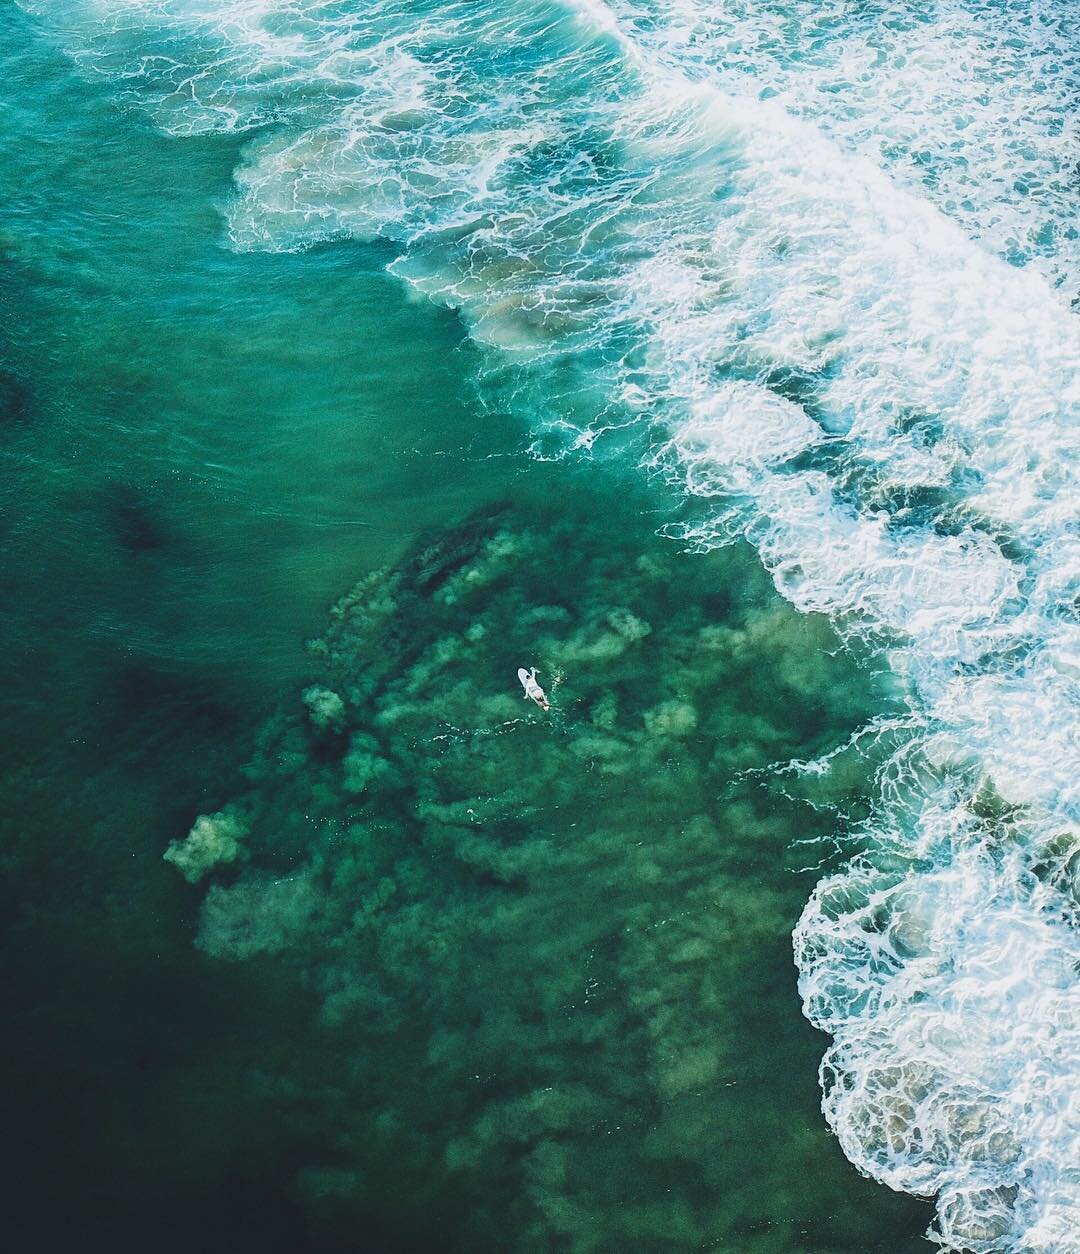 Untamable waters. Deep seas and wide oceans. 🌊💫 ⠀⠀⠀⠀⠀⠀
⠀⠀⠀⠀⠀⠀
⠀⠀⠀⠀⠀⠀
⠀⠀⠀⠀⠀⠀
&bull;#surferworld #noplamtrees #teamoneill #rvcatrunks #vansfamily #truetothis #reef #roxypro #ripcurlpro #thesearch #cisurfboards #nixon #ourkind #droneoftheday @droneoft